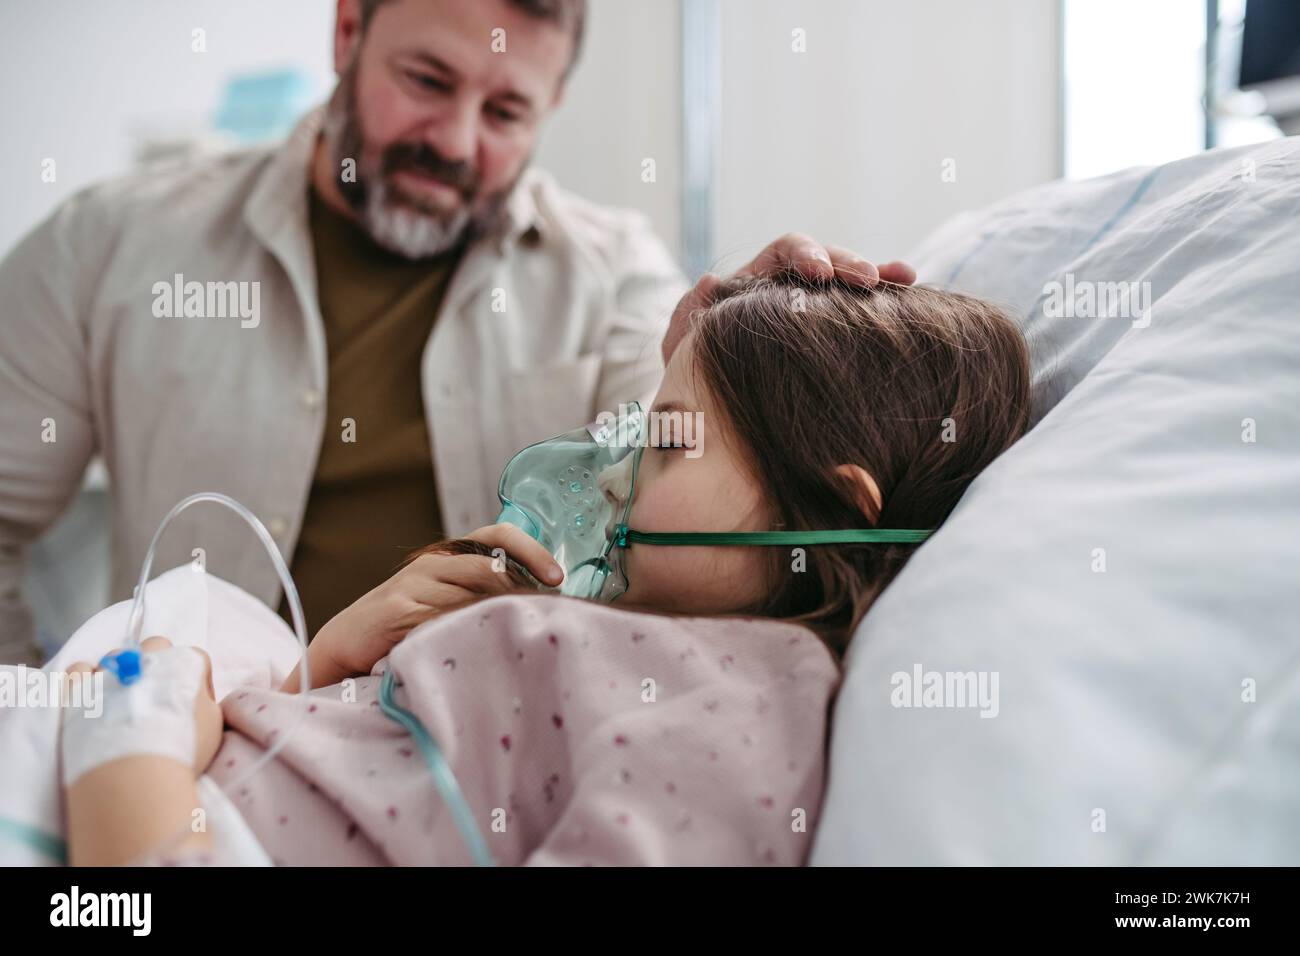 Father holding hand of his daughter in hospital bed. Child patient in hospital bed with an oxygen mask on her face in ICU. Stock Photo